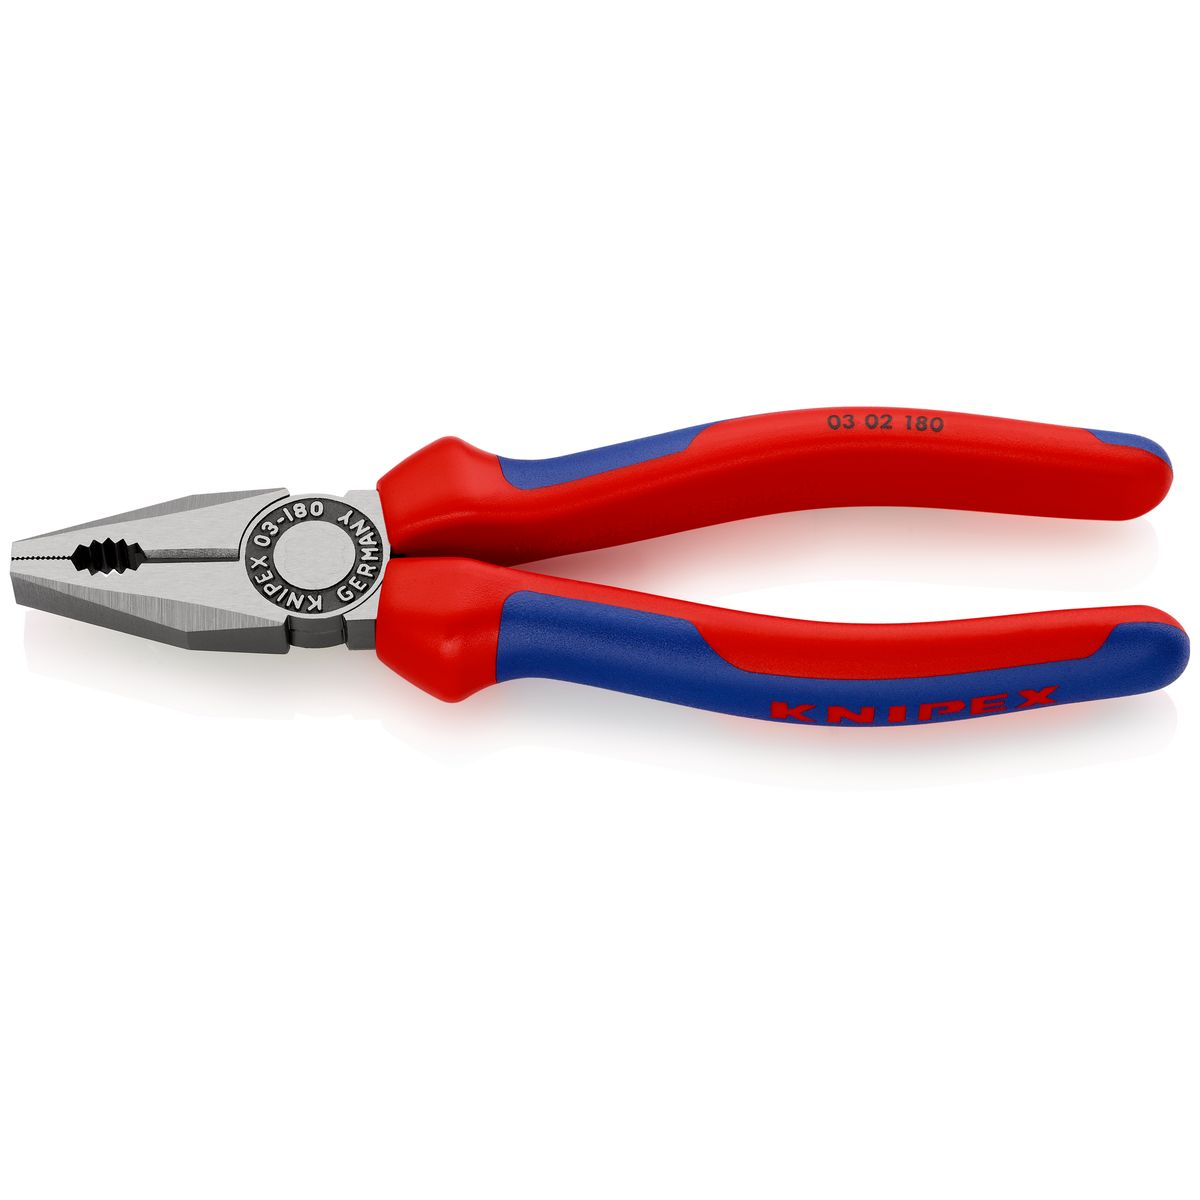 COMBINATION PLIERS 0302 180mm Knipex